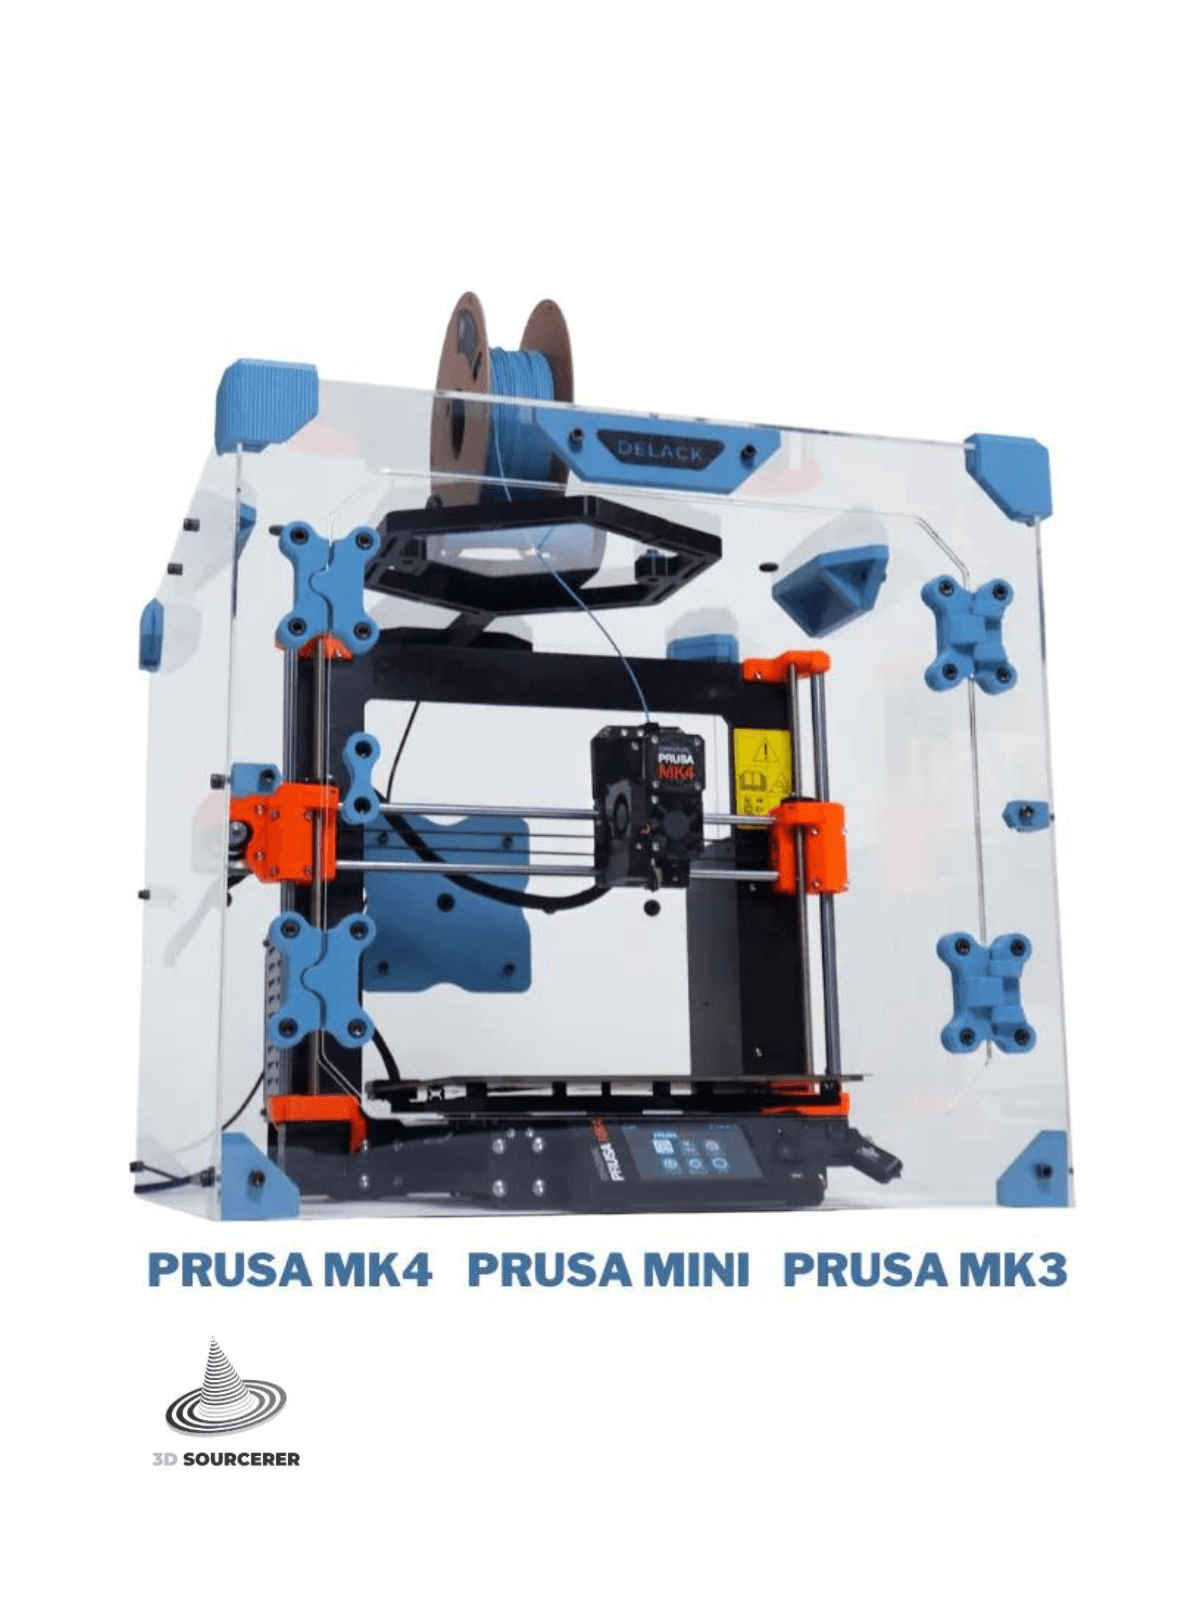 The DELACK Enclosure is compatible with the Prusa MK4, Prusa Mini, and Prusa MK3 series of 3D printe 3d model